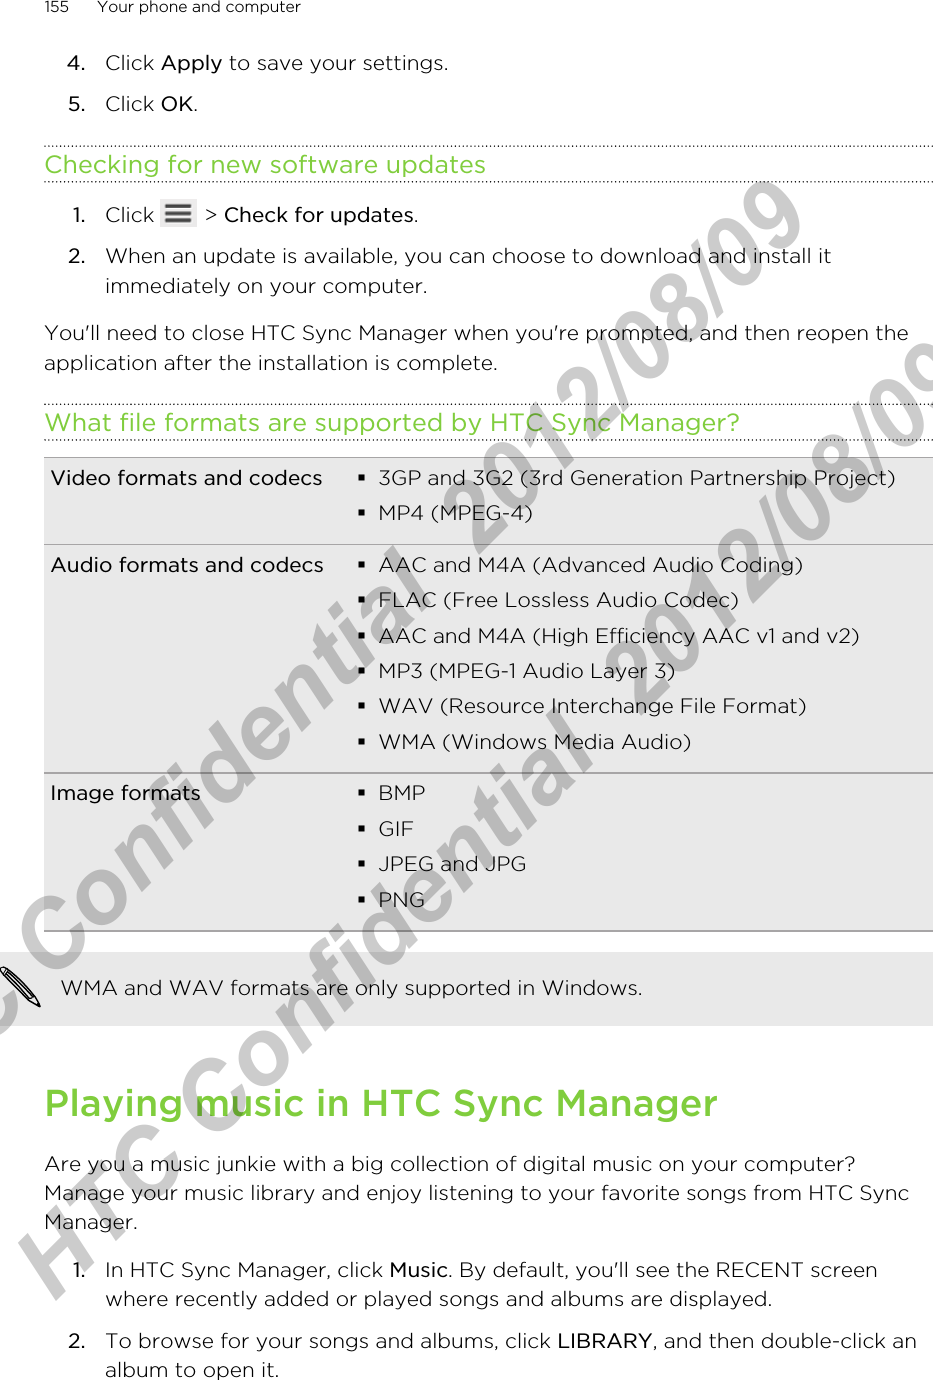 4. Click Apply to save your settings.5. Click OK.Checking for new software updates1. Click   &gt; Check for updates.2. When an update is available, you can choose to download and install itimmediately on your computer.You&apos;ll need to close HTC Sync Manager when you&apos;re prompted, and then reopen theapplication after the installation is complete.What file formats are supported by HTC Sync Manager?Video formats and codecs §3GP and 3G2 (3rd Generation Partnership Project)§MP4 (MPEG-4)Audio formats and codecs §AAC and M4A (Advanced Audio Coding)§FLAC (Free Lossless Audio Codec)§AAC and M4A (High Efficiency AAC v1 and v2)§MP3 (MPEG-1 Audio Layer 3)§WAV (Resource Interchange File Format)§WMA (Windows Media Audio)Image formats §BMP§GIF§JPEG and JPG§PNGWMA and WAV formats are only supported in Windows.Playing music in HTC Sync ManagerAre you a music junkie with a big collection of digital music on your computer?Manage your music library and enjoy listening to your favorite songs from HTC SyncManager.1. In HTC Sync Manager, click Music. By default, you&apos;ll see the RECENT screenwhere recently added or played songs and albums are displayed.2. To browse for your songs and albums, click LIBRARY, and then double-click analbum to open it.155 Your phone and computerHTC Confidential  2012/08/09  HTC Confidential  2012/08/09 